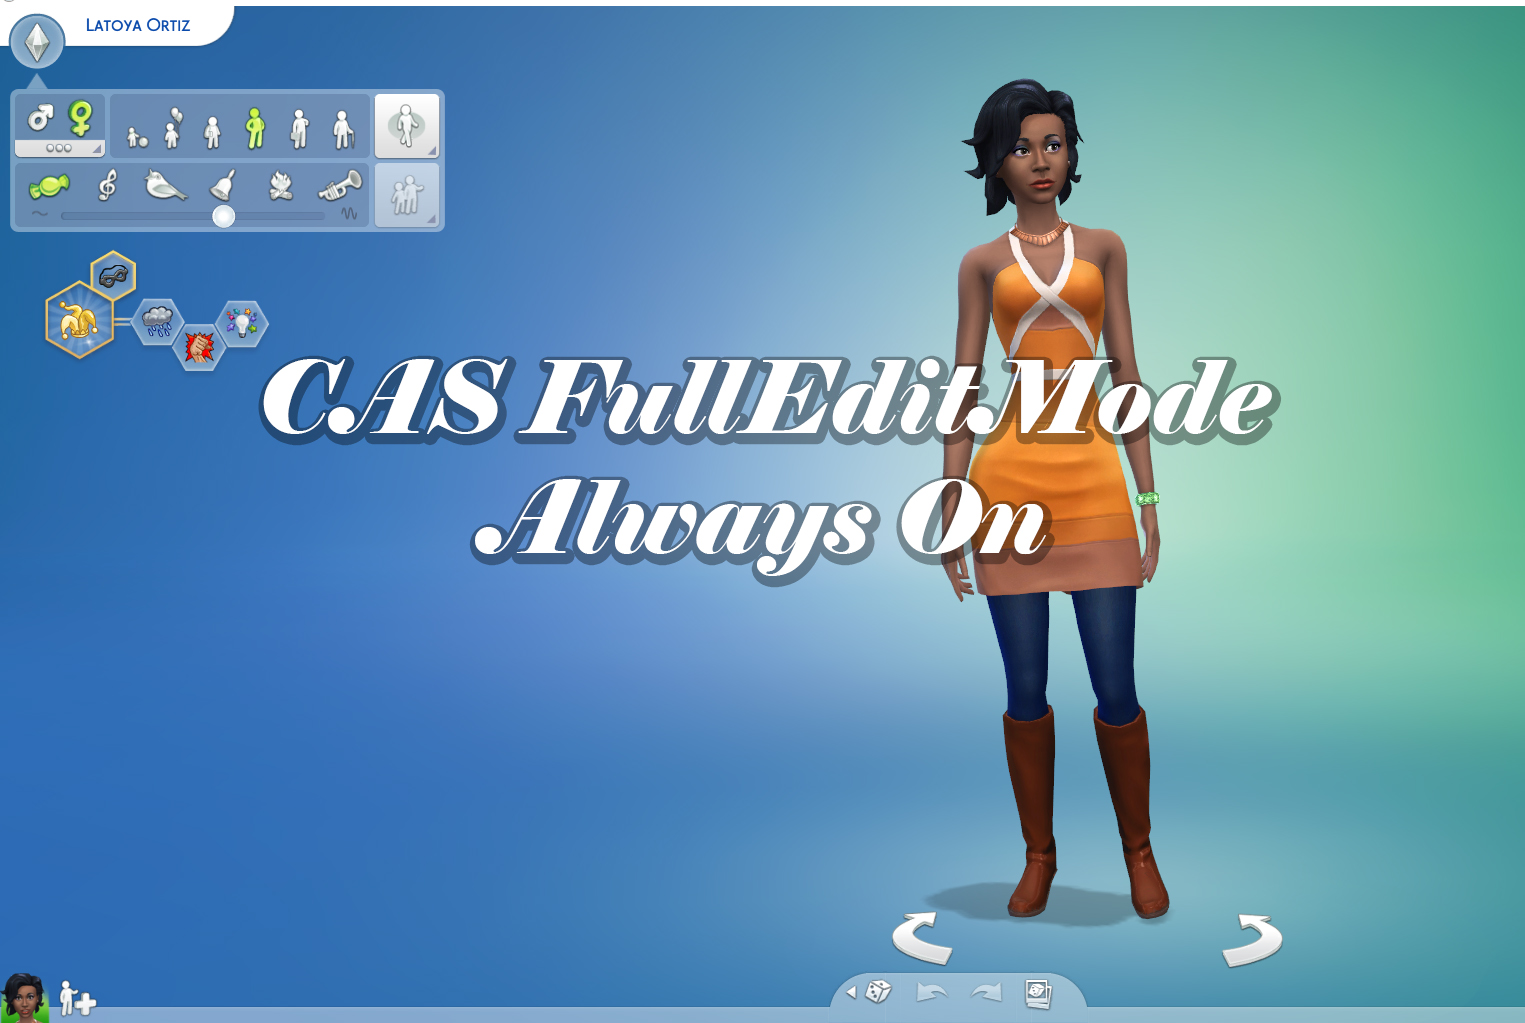 How to Use The Sims 4 CAS Full Edit Mode Cheat (CAS Cheat)